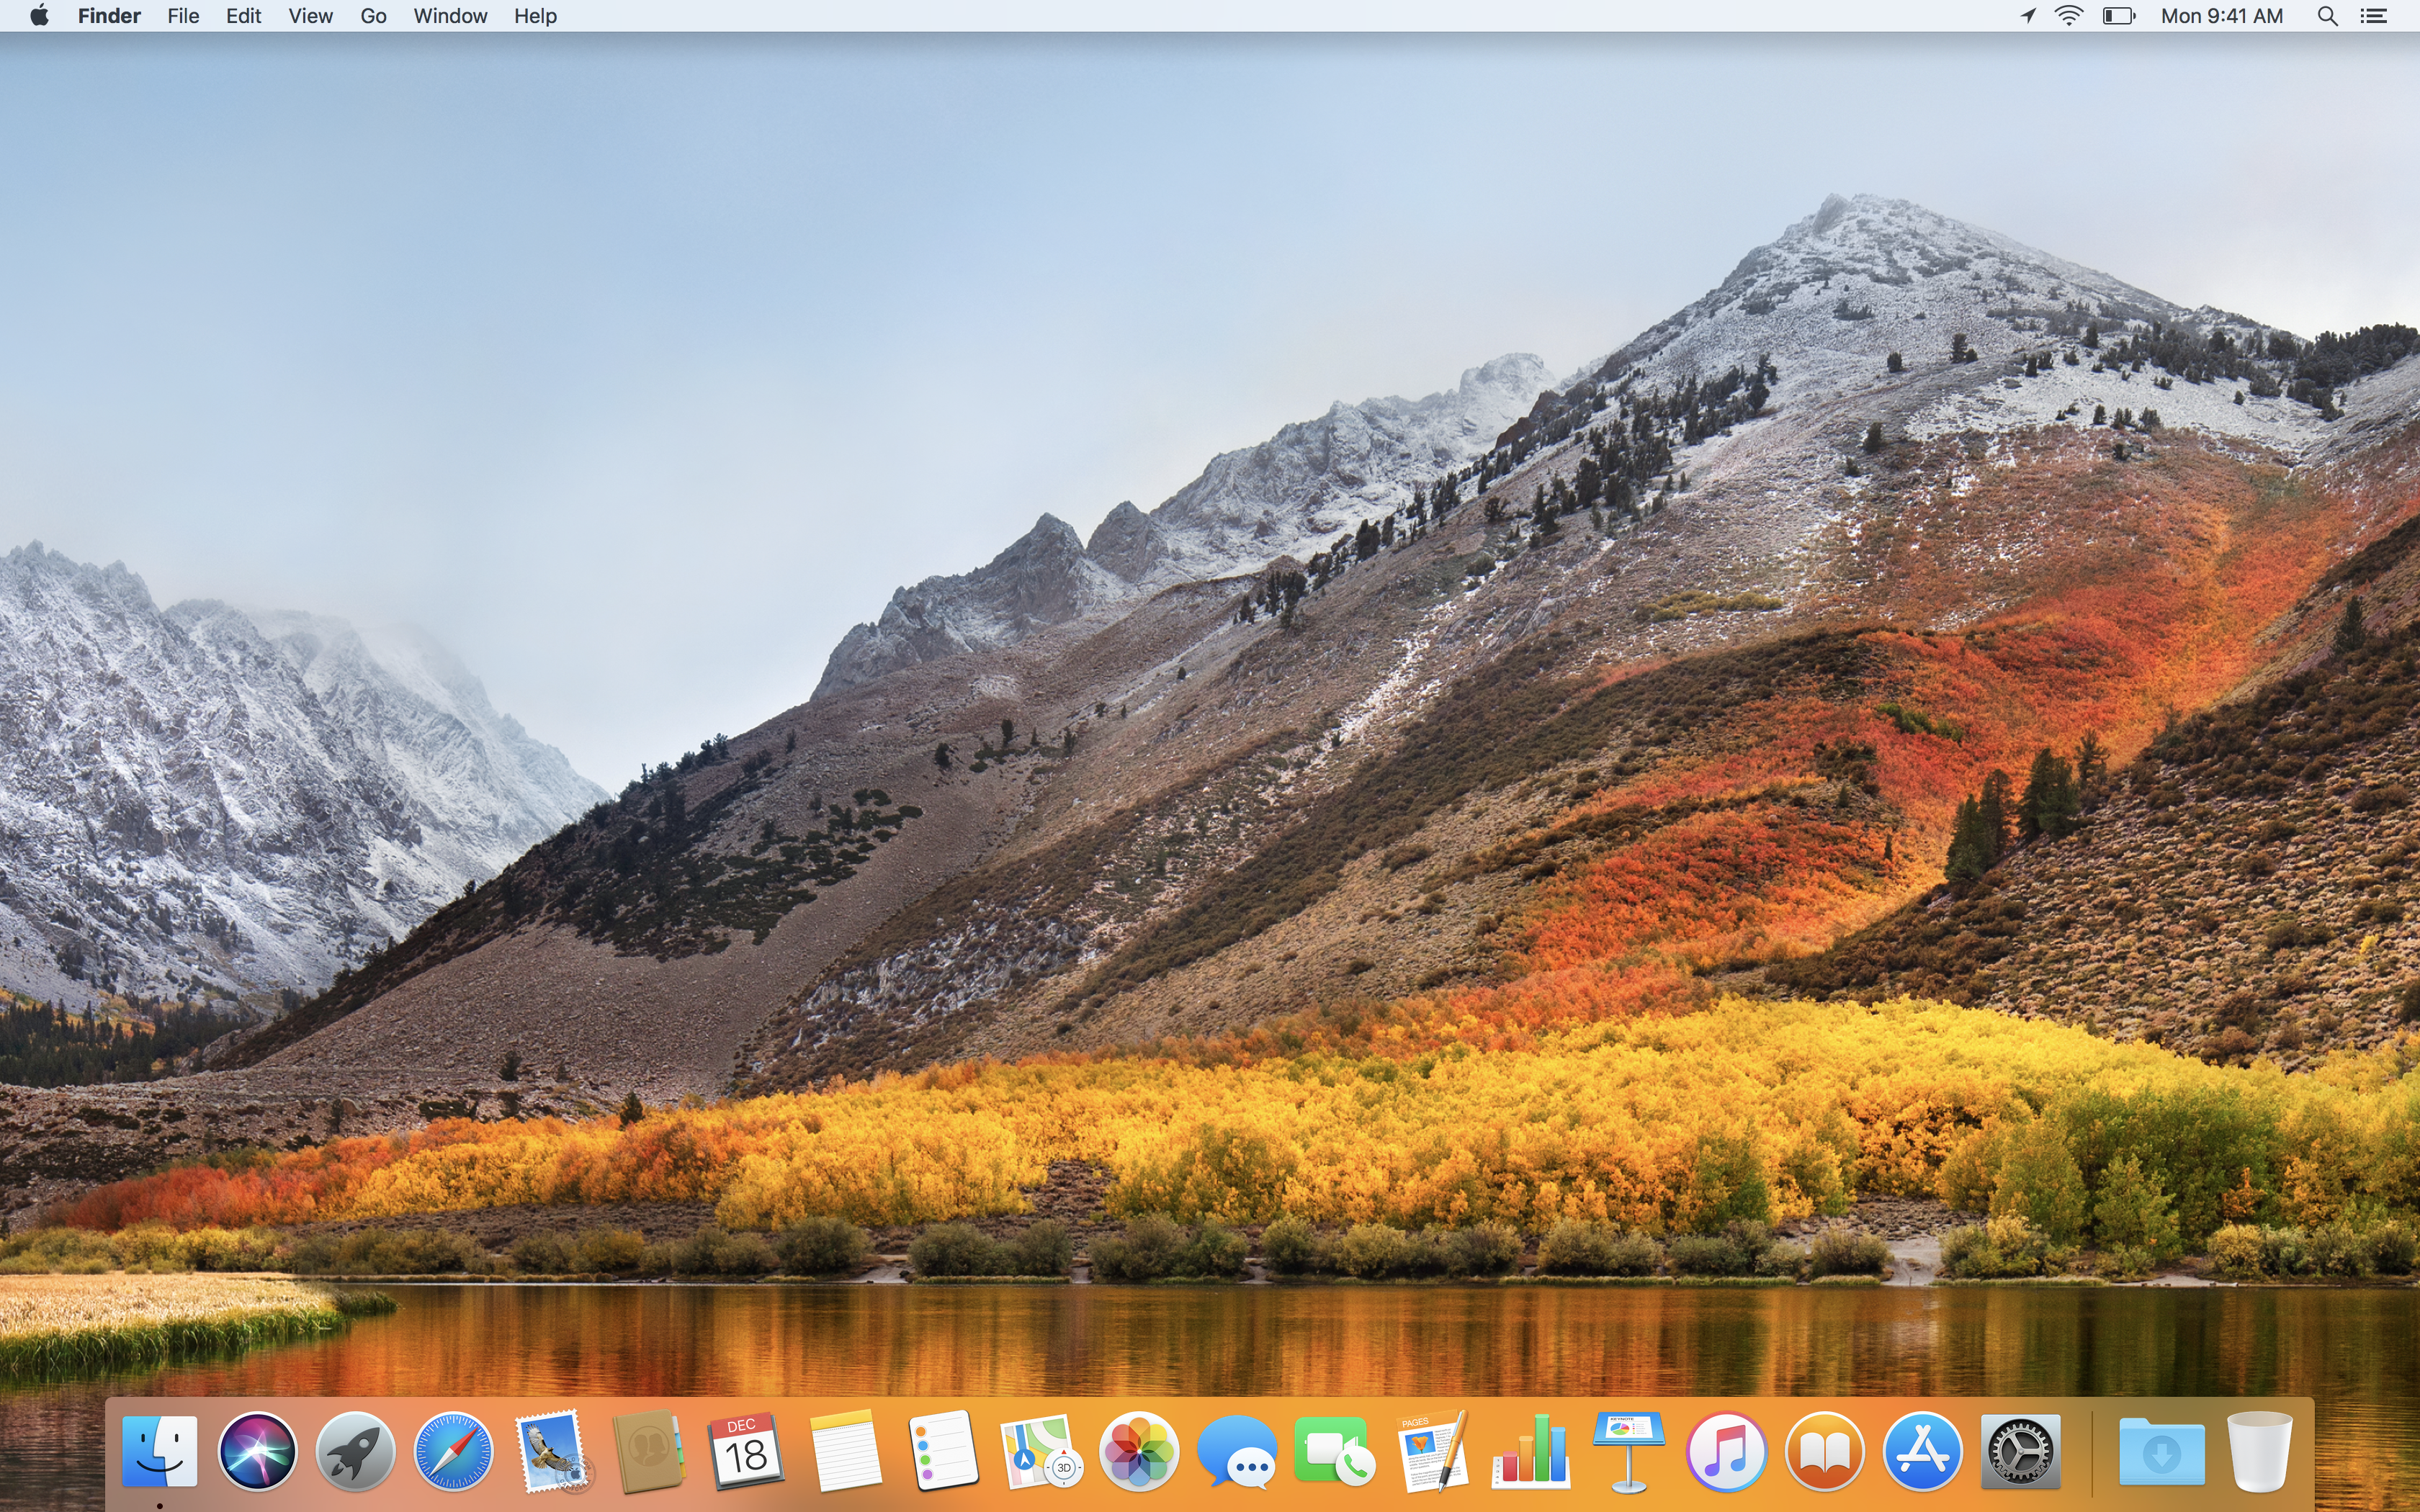 macOS Screen Shot with no windows and time set to 9:41 am.